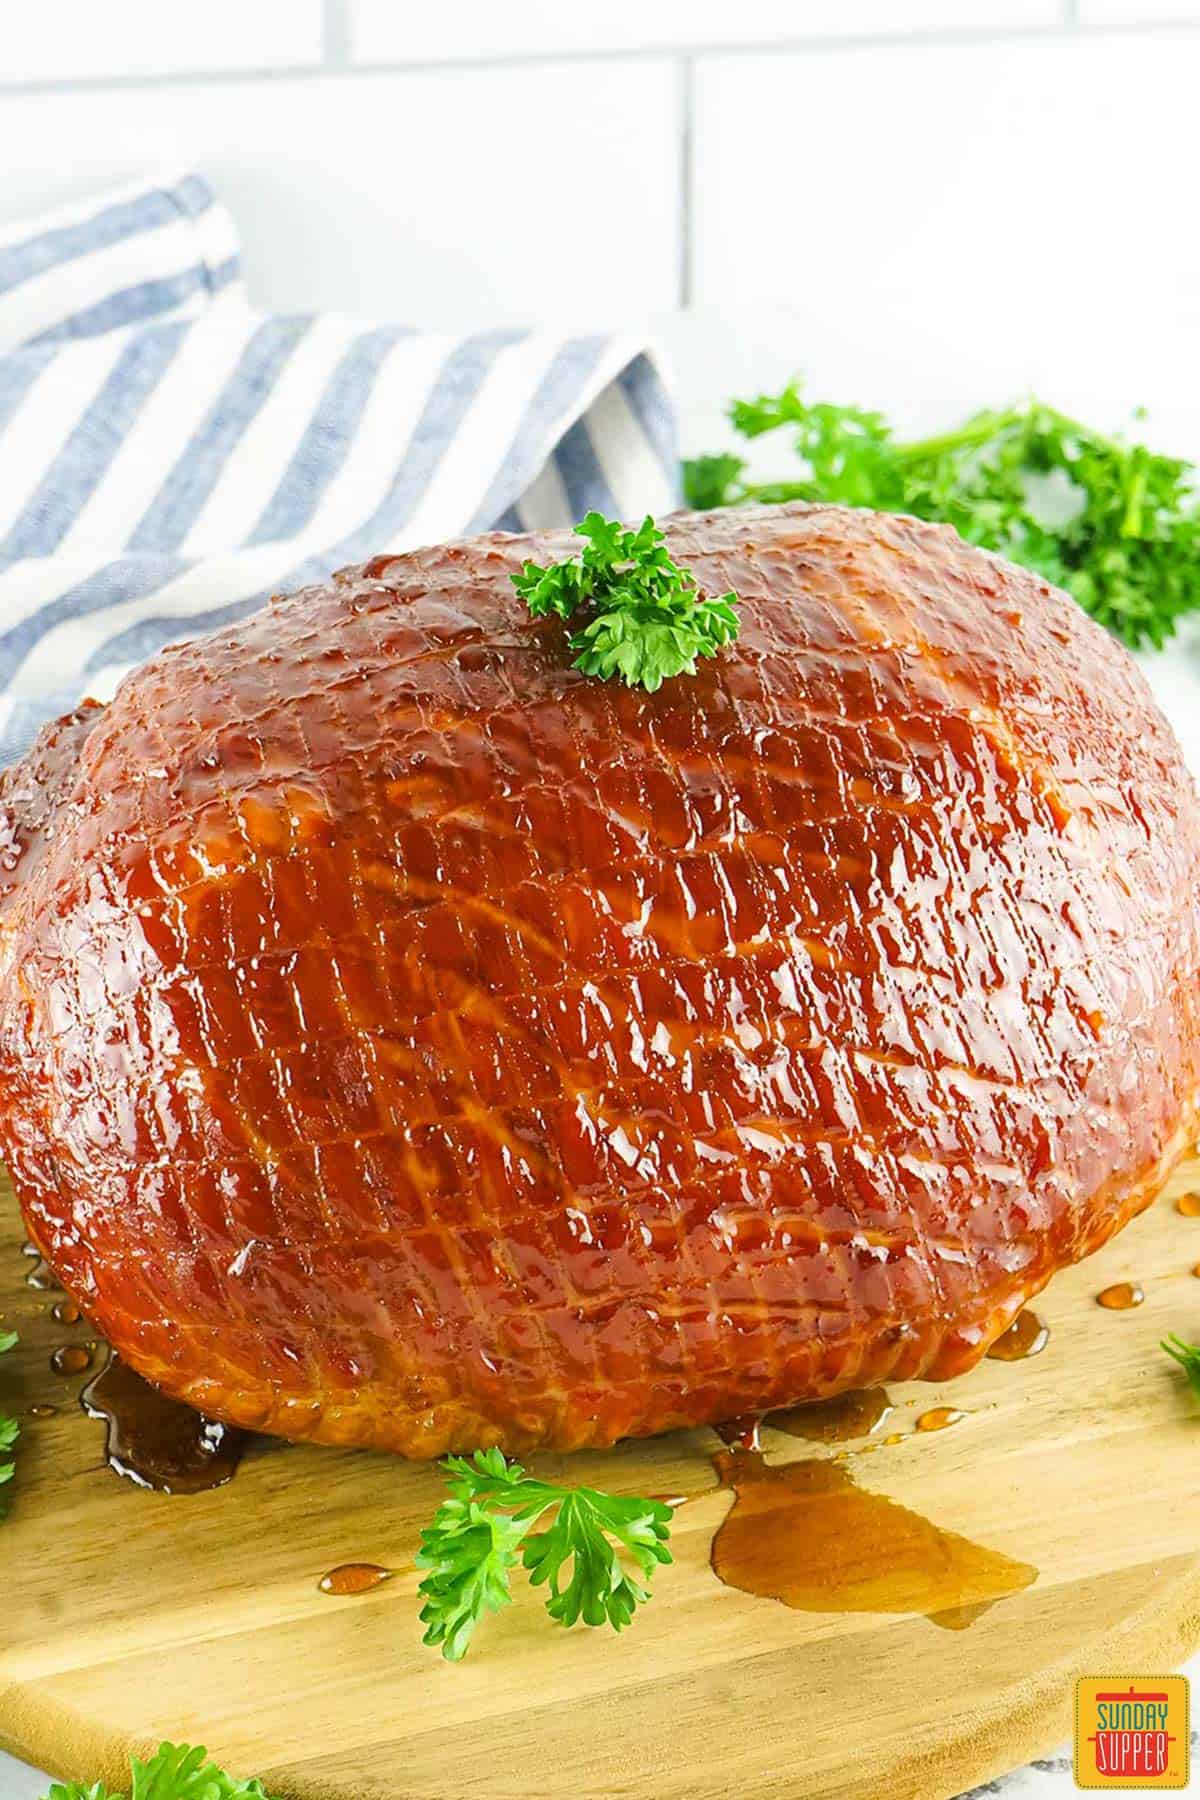 a fully cooked bourbon glaze ham on a wooden cutting board with parsley garnish